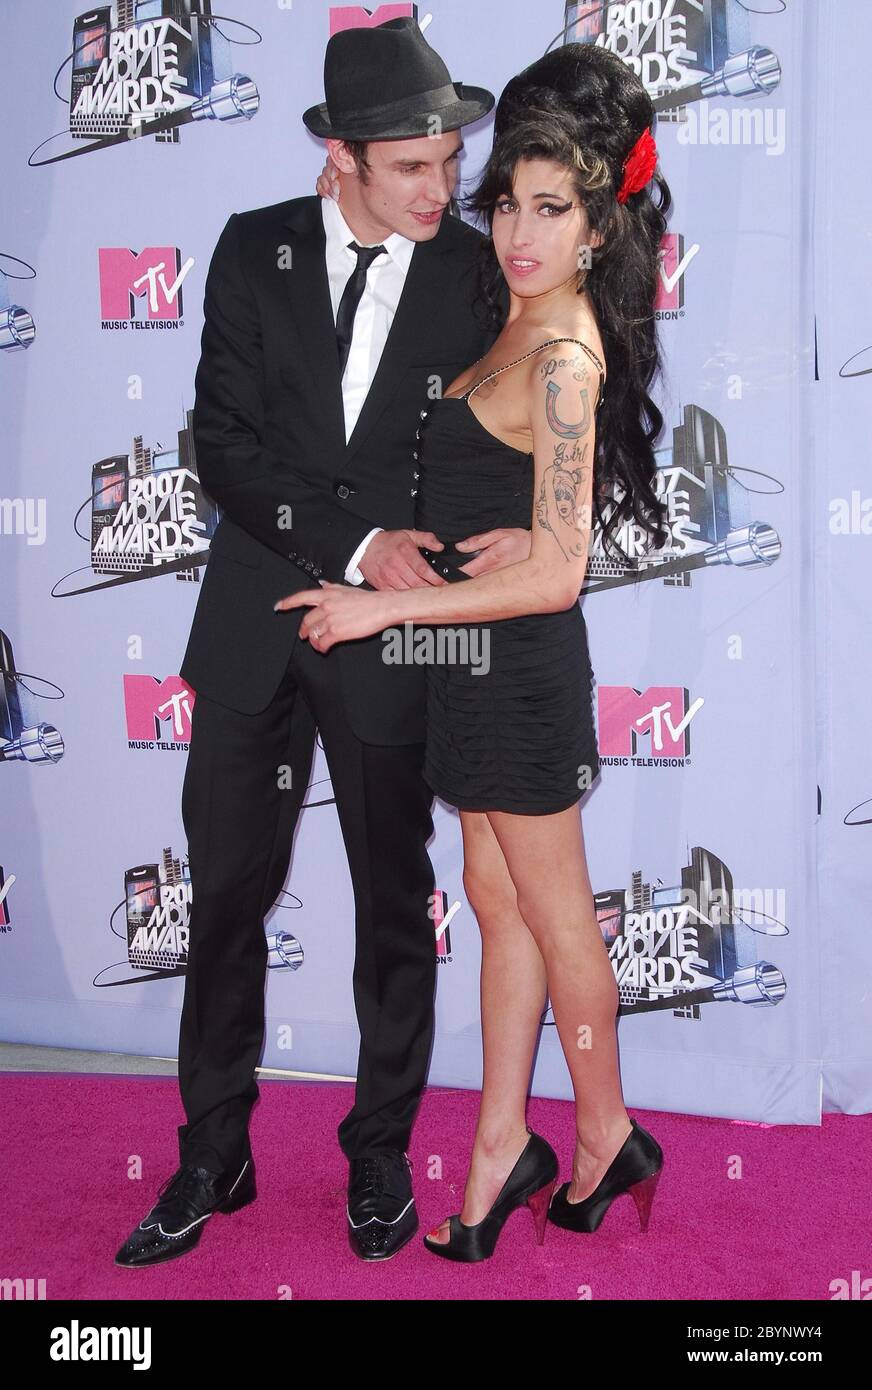 Amy Winehouse and husband Blake Fielder-Civil at the 2007 MTV Movie Awards - Arrivals held at the Gibson Amphitheater, Universal Studios Hollywood in Universal City, CA. The event took place on Sunday, June 3, 2007. Photo by: SBM / PictureLux - File Reference # 34006-6679SBMPLX Stock Photo